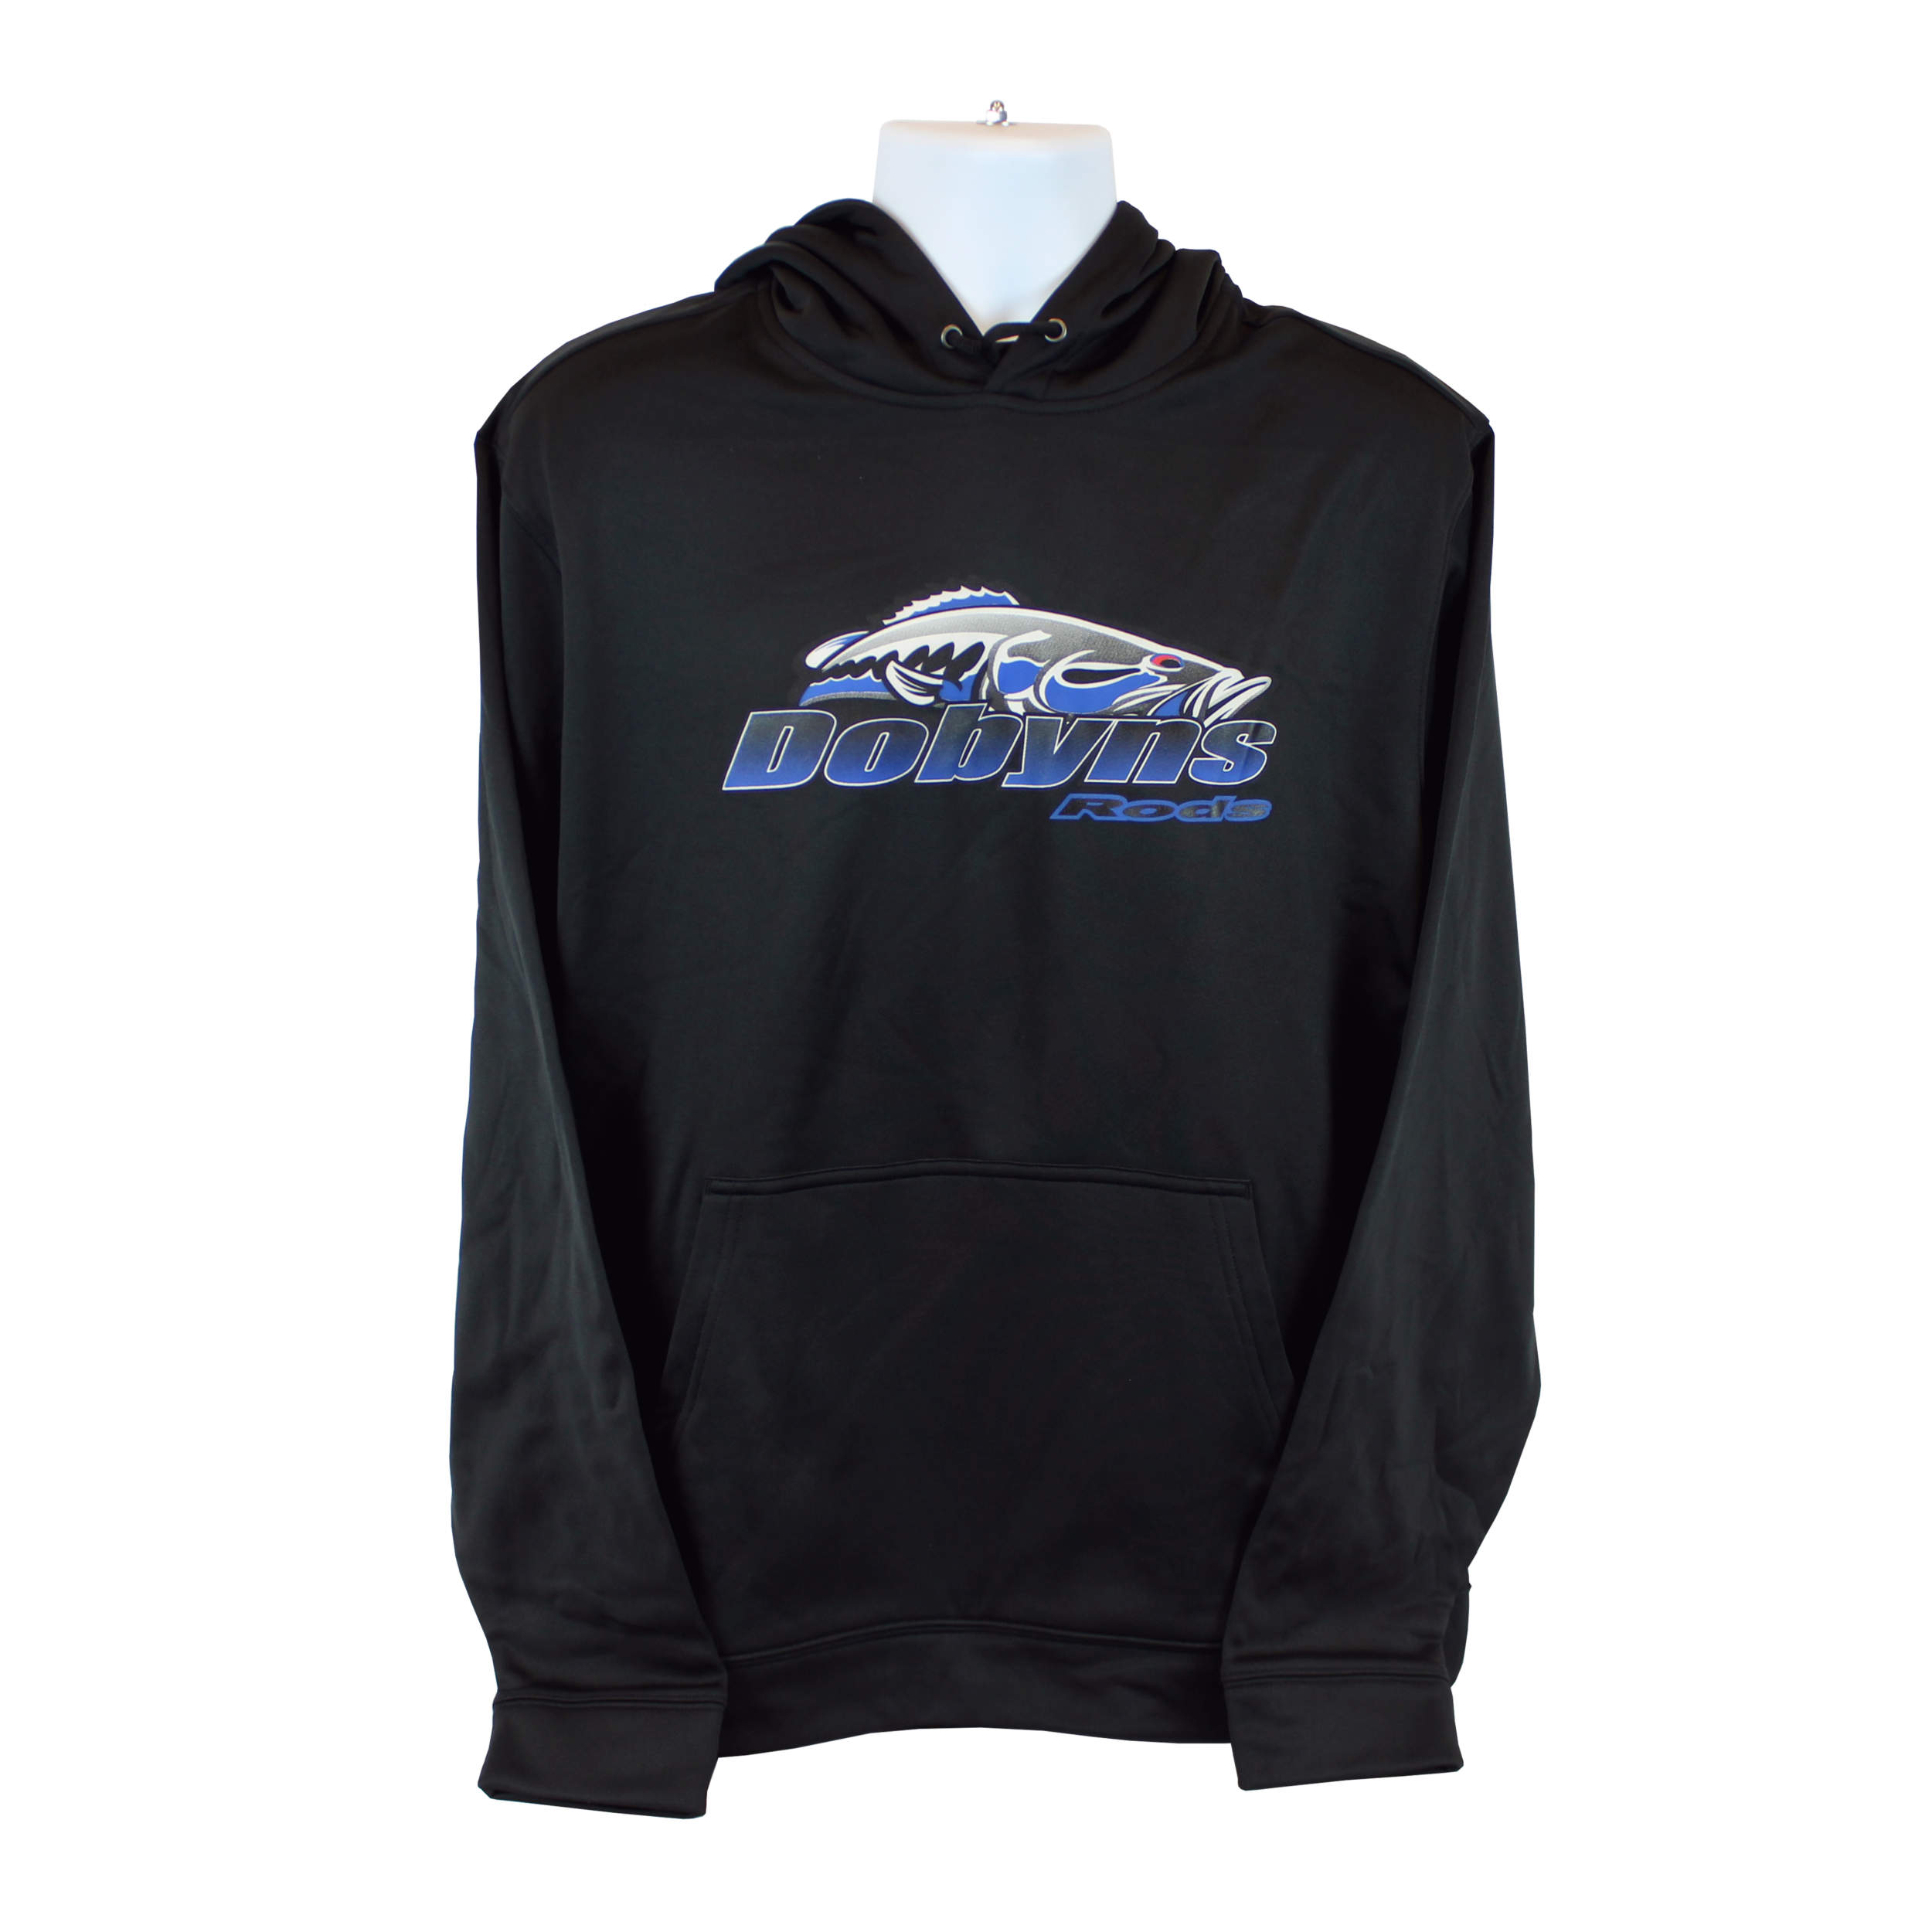 Dobyns Polyester Hoodie-Black with Blue logo